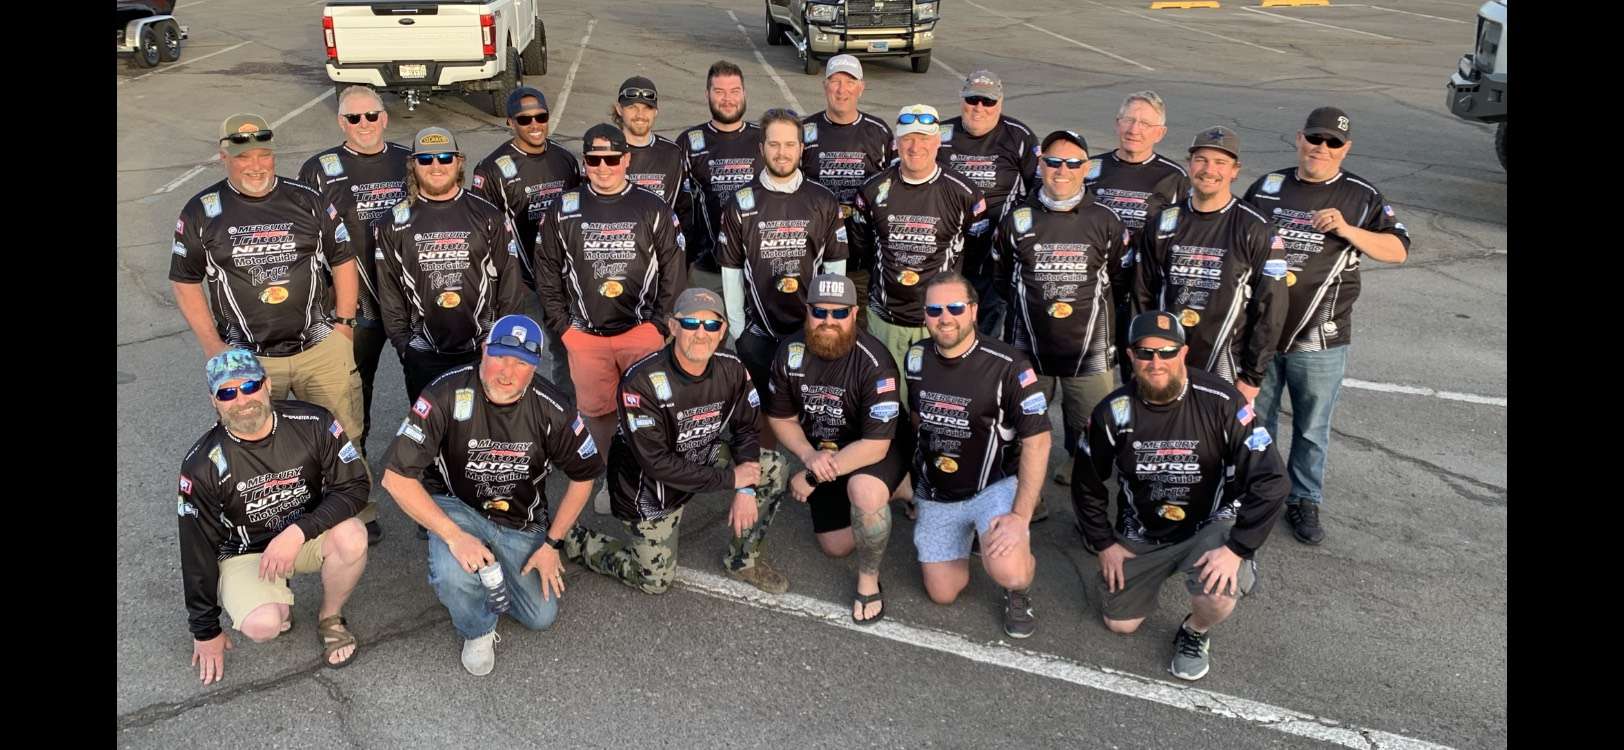 Team Wyoming – Front row: Jeff Larson, Andrew Sayles, Earl Wells, Dusten Stewart, Chris Harvey, Tim Rawlings. Back row: Randy Chandler, Kevin Dehart, Ben Bodily, Austin Tate, Cody Pierson, Nigel Dalton, Russell Baker, Carson Park, Bubba O’Neill, Shawn Lee, Steve Young, Brent Shores, Kelly Lee, Sonny Mays, Clif Gallagher.